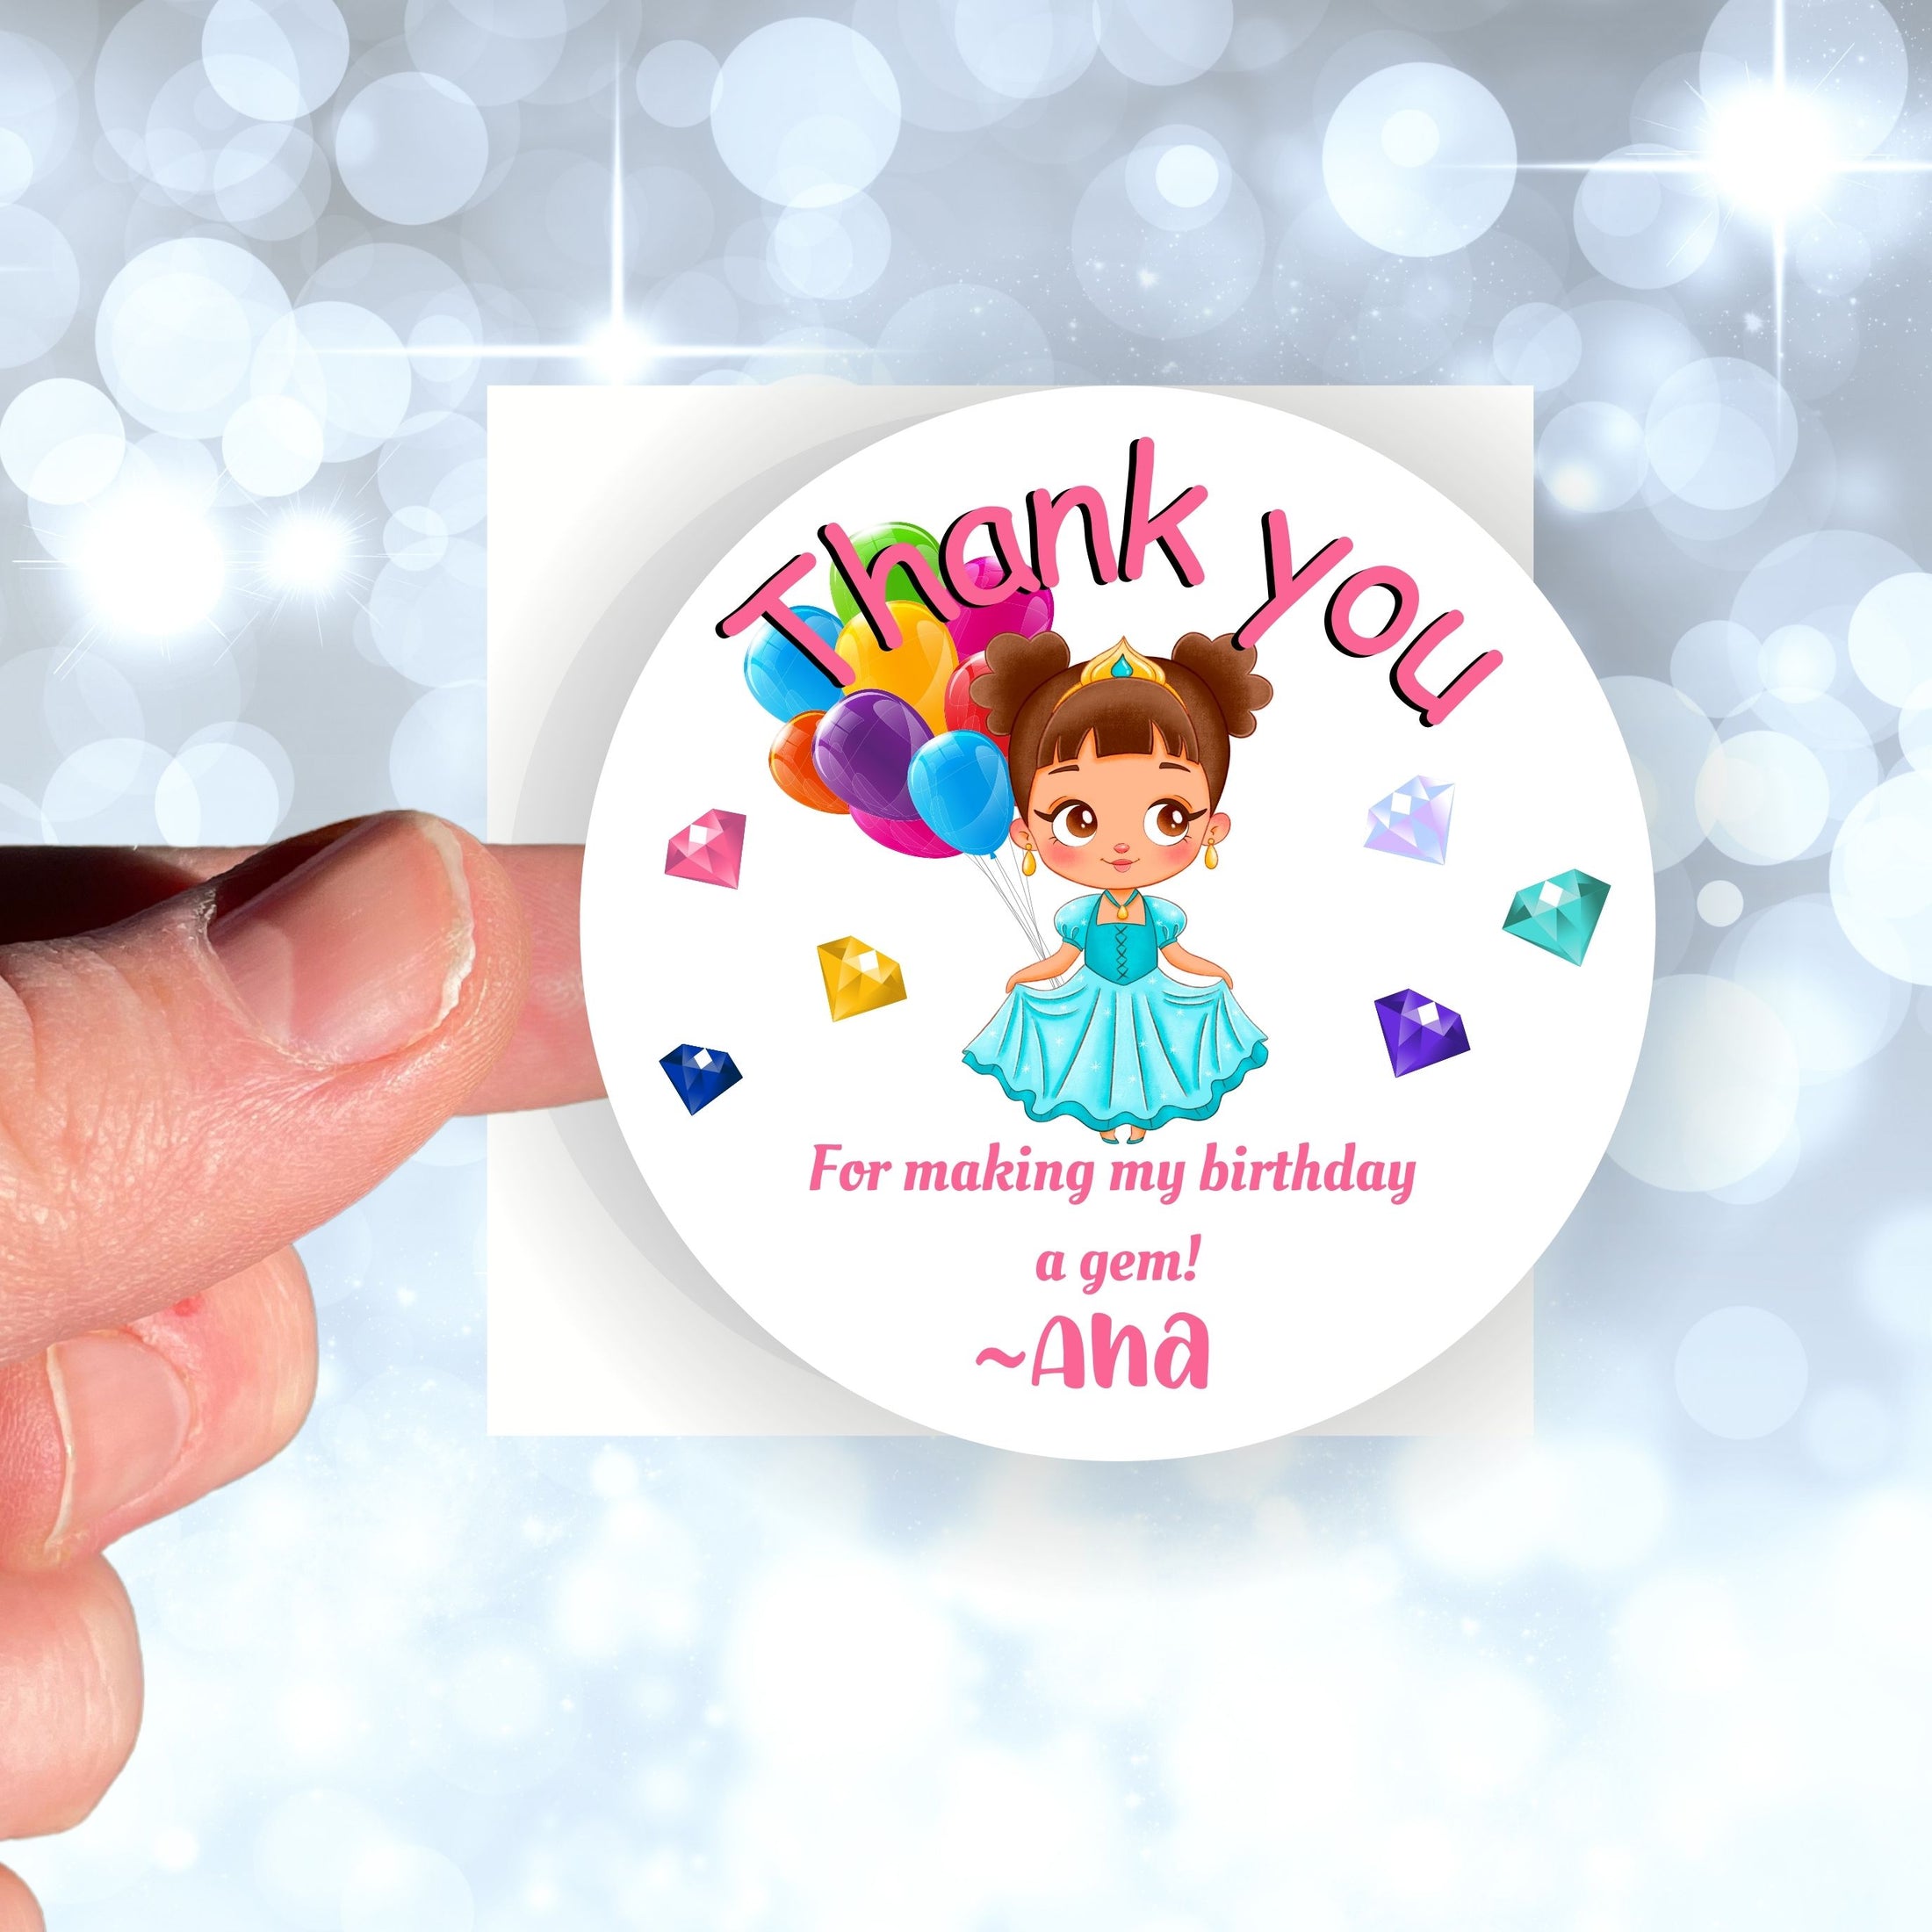 This image shows a hand holding the personalized princess themed thank you sticker.